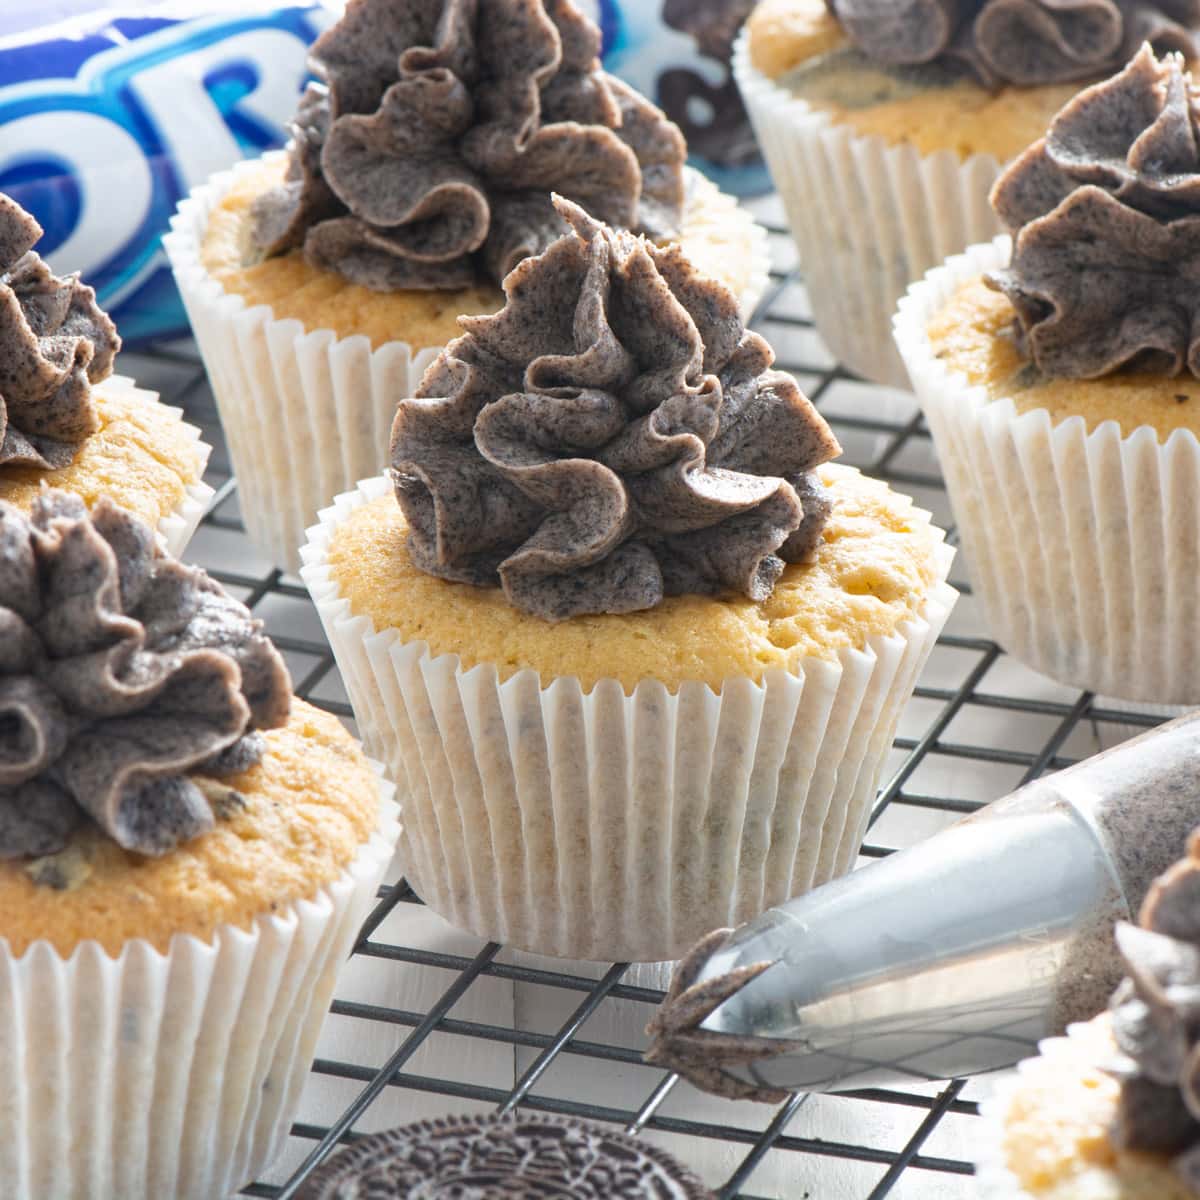 Oreo cupcakes with piped oreo buttercream decoration.